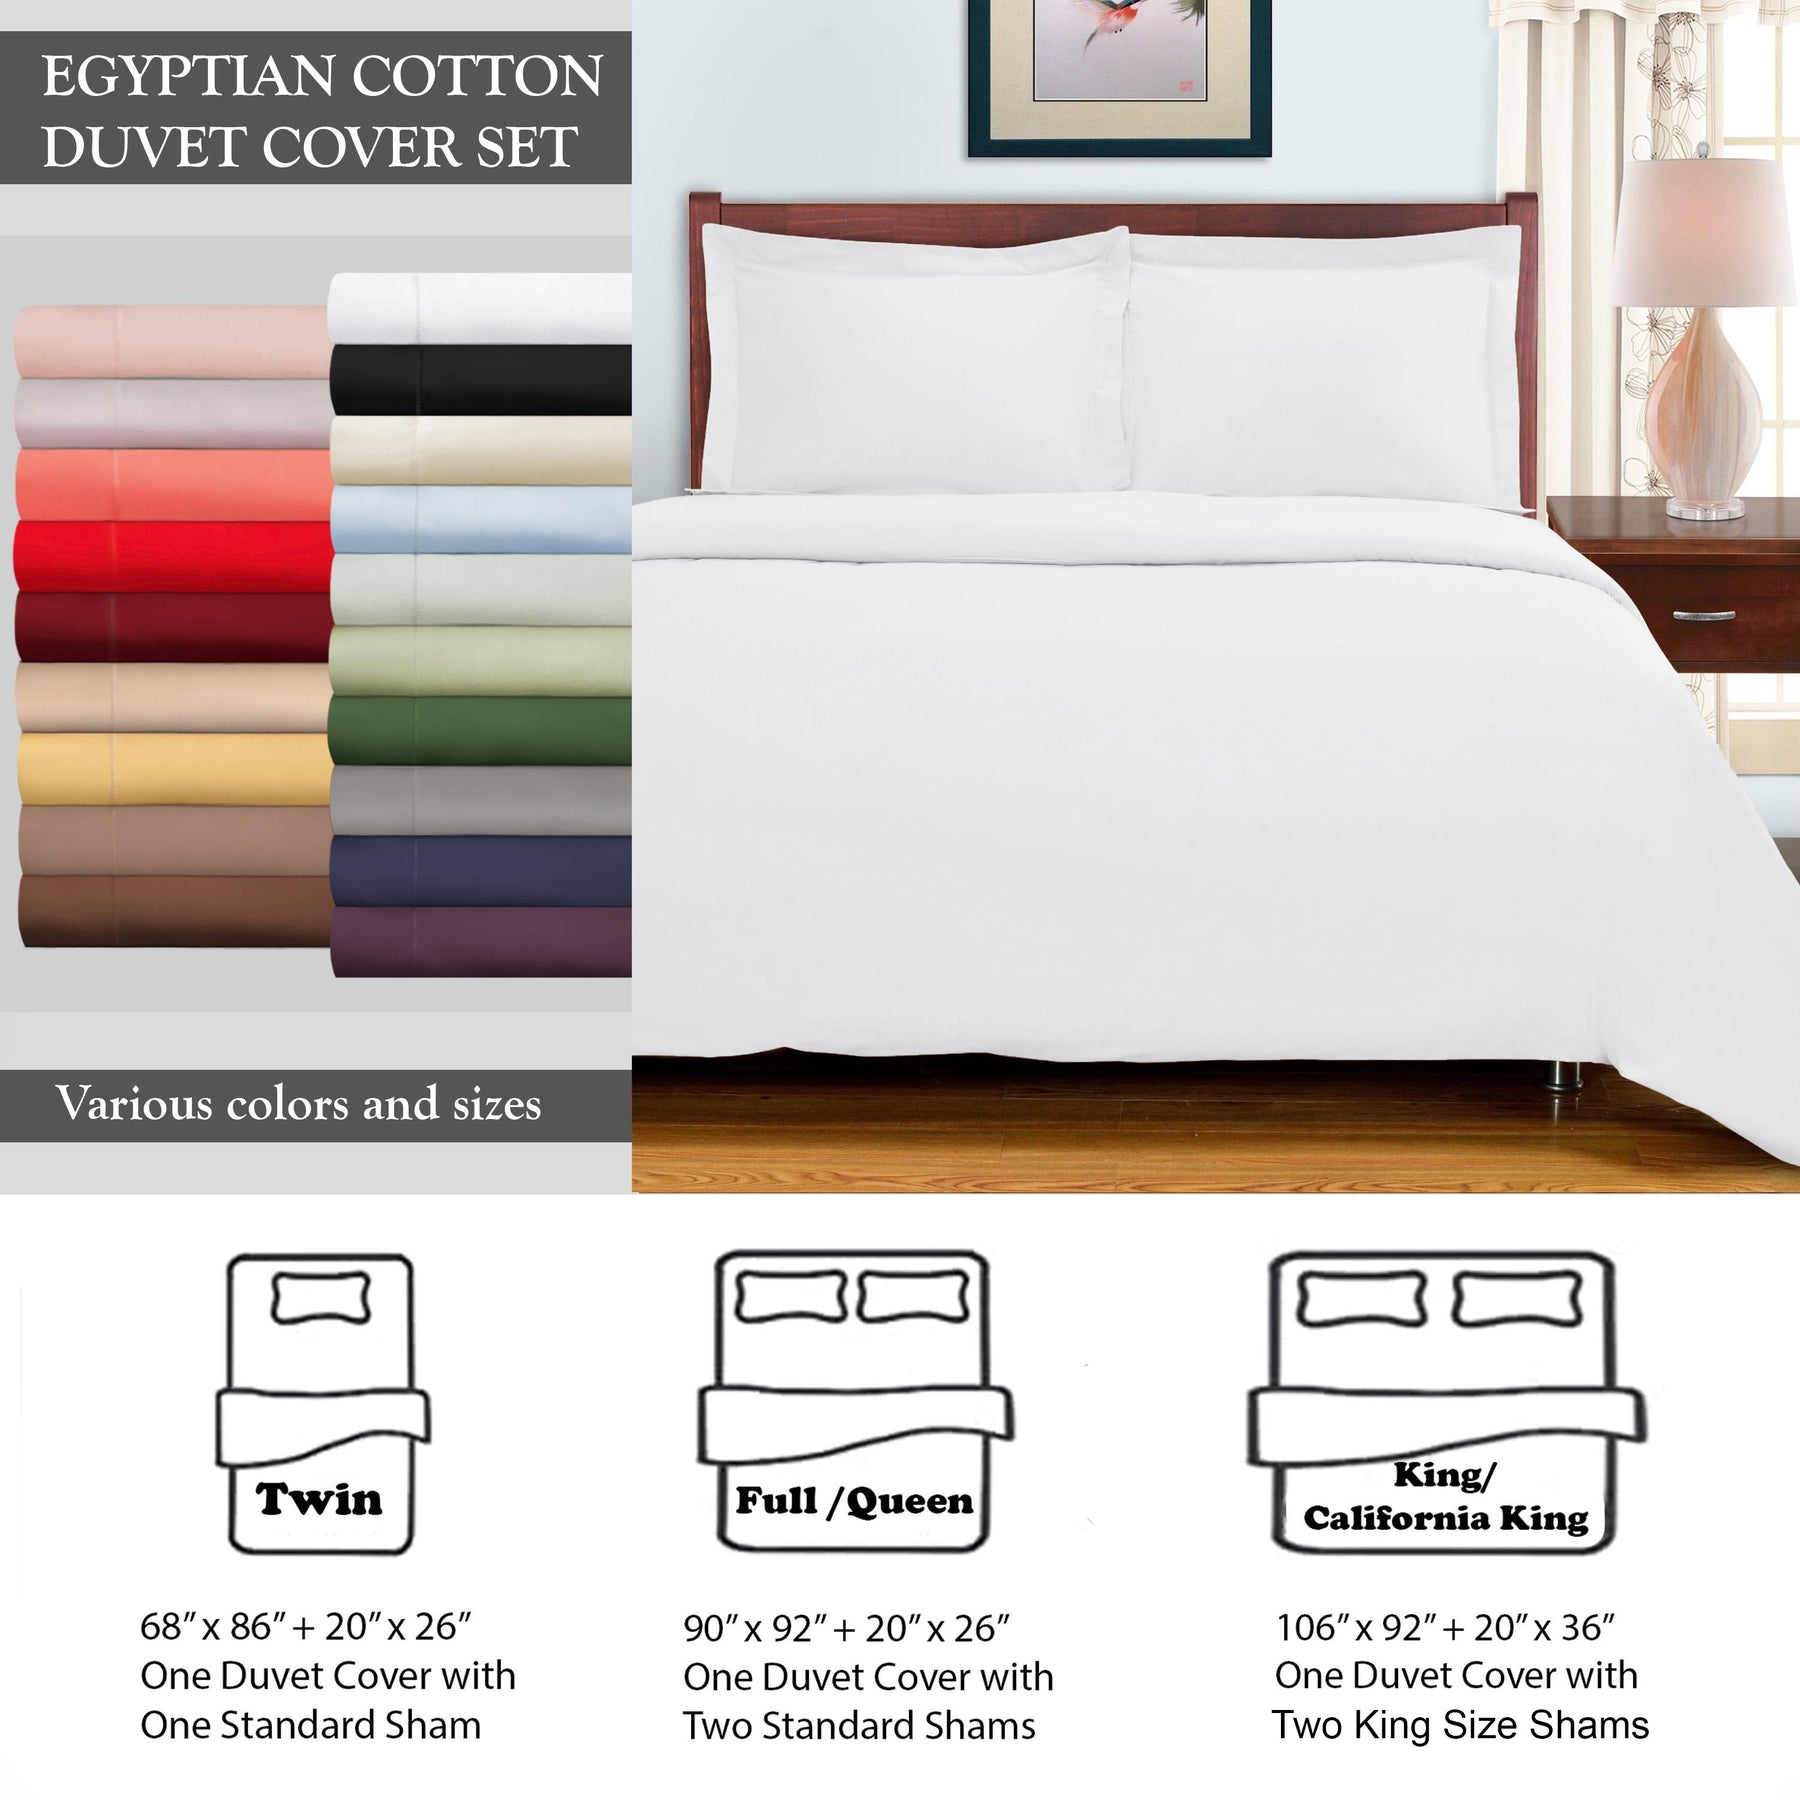 Superior Egyptian Cotton 300 Thread Count Solid Duvet Cover Set - White